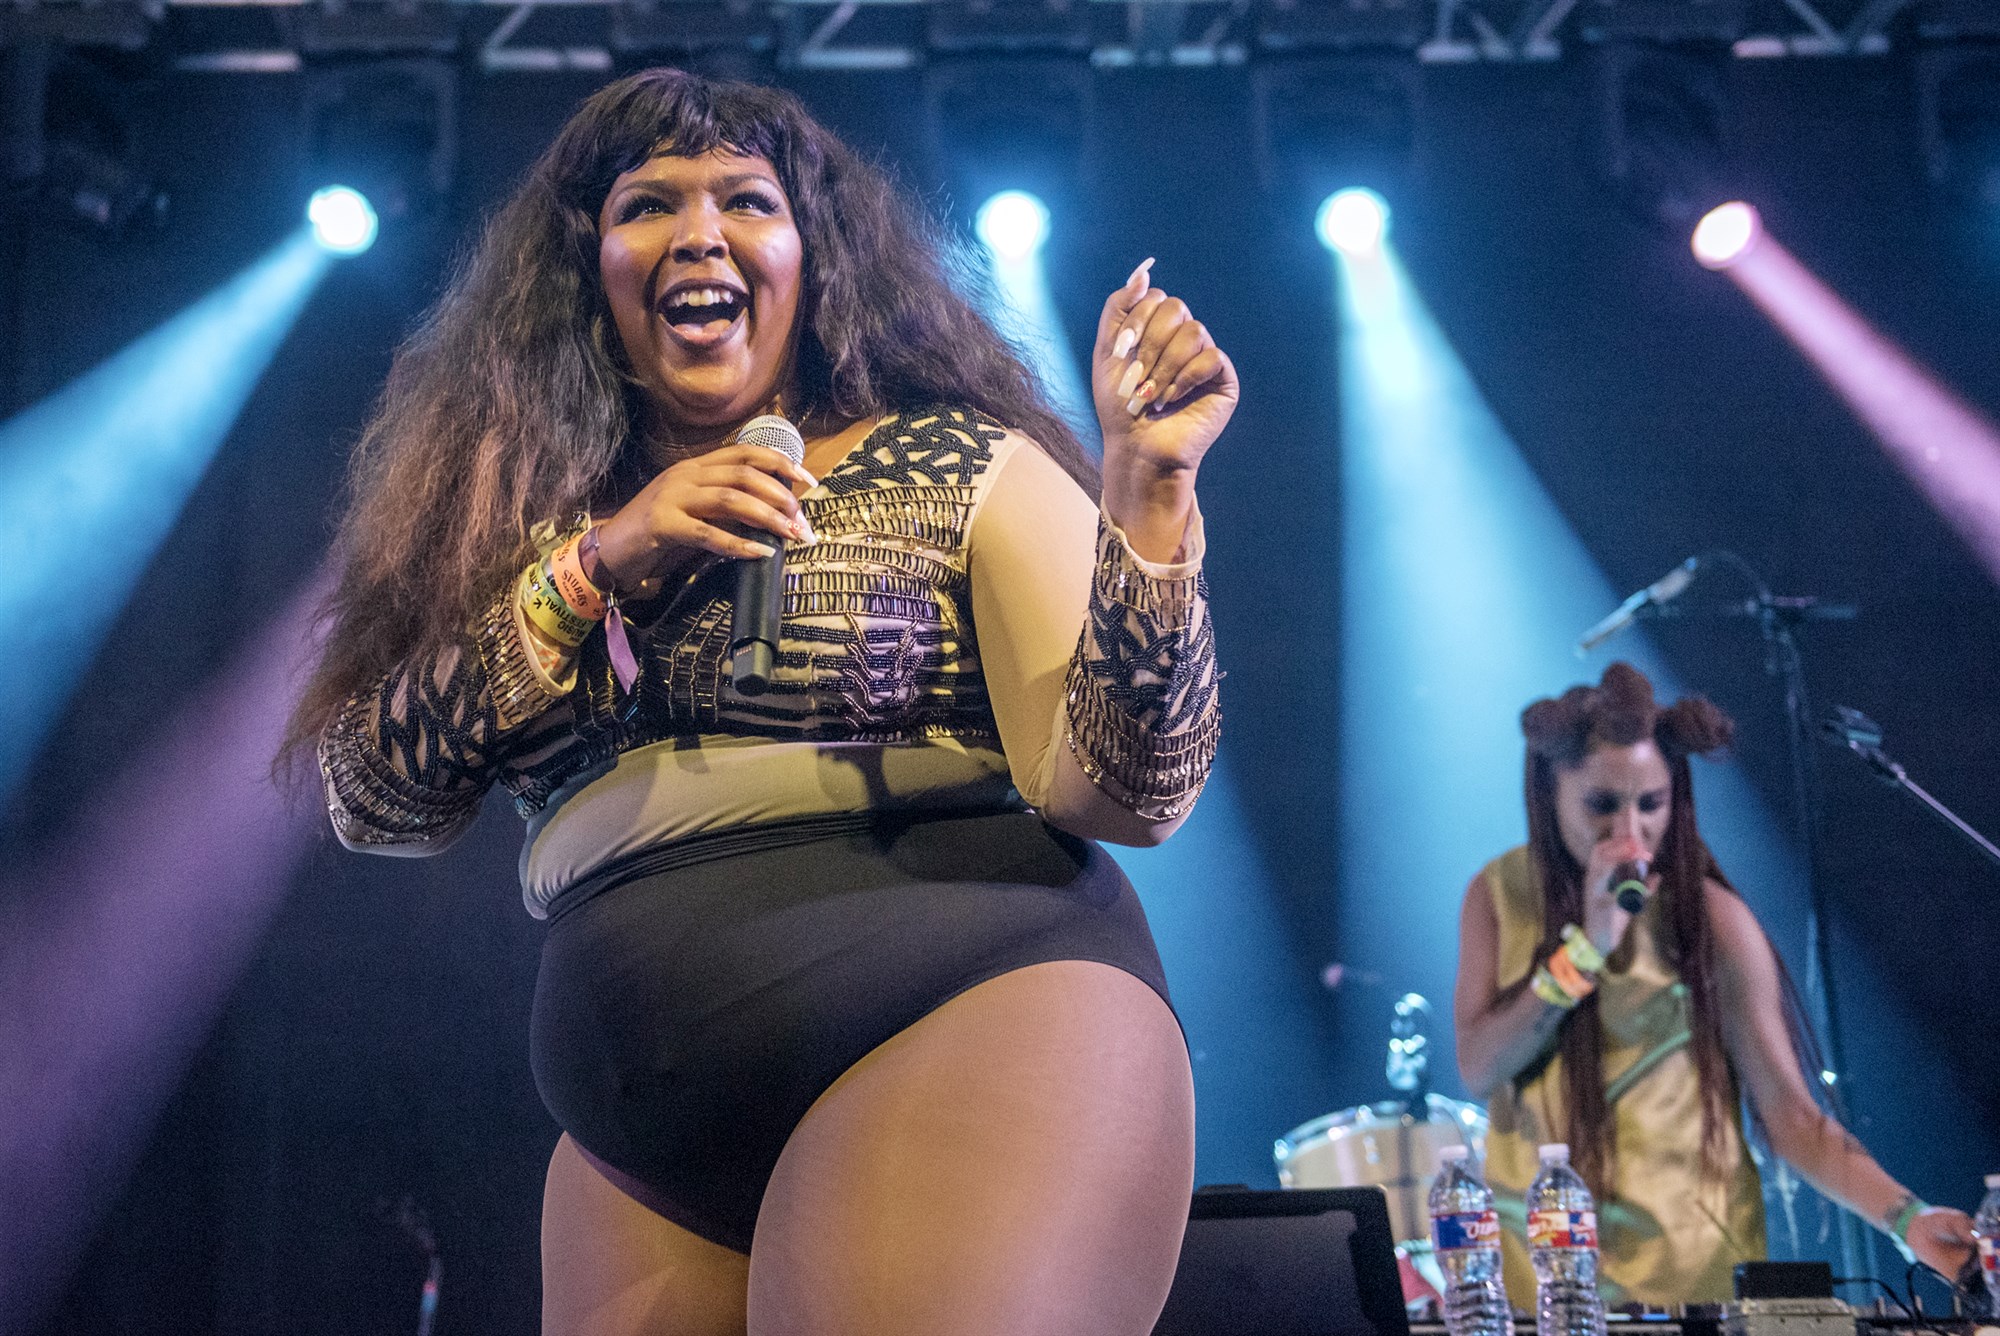 Lizzo performs on stage.